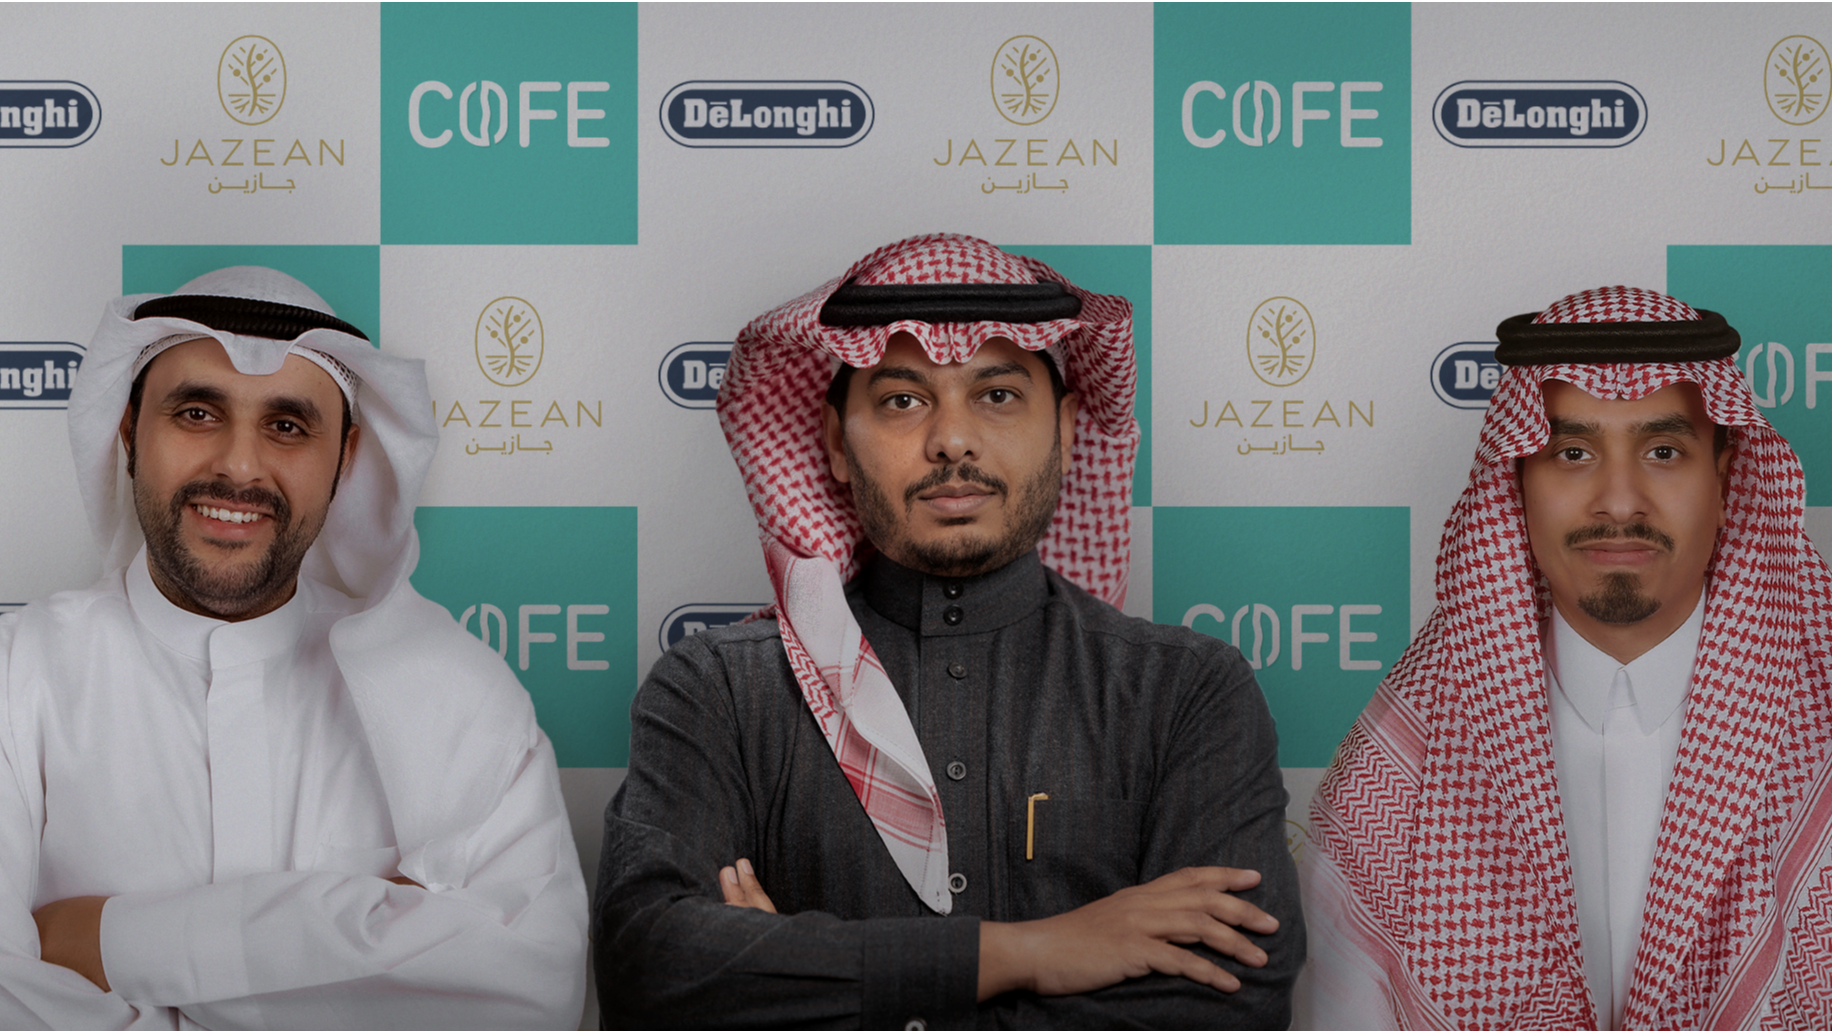 https://adgully.me/post/4556/cofe-joins-forces-with-delonghi-and-jazean-to-elevate-coffee-experience